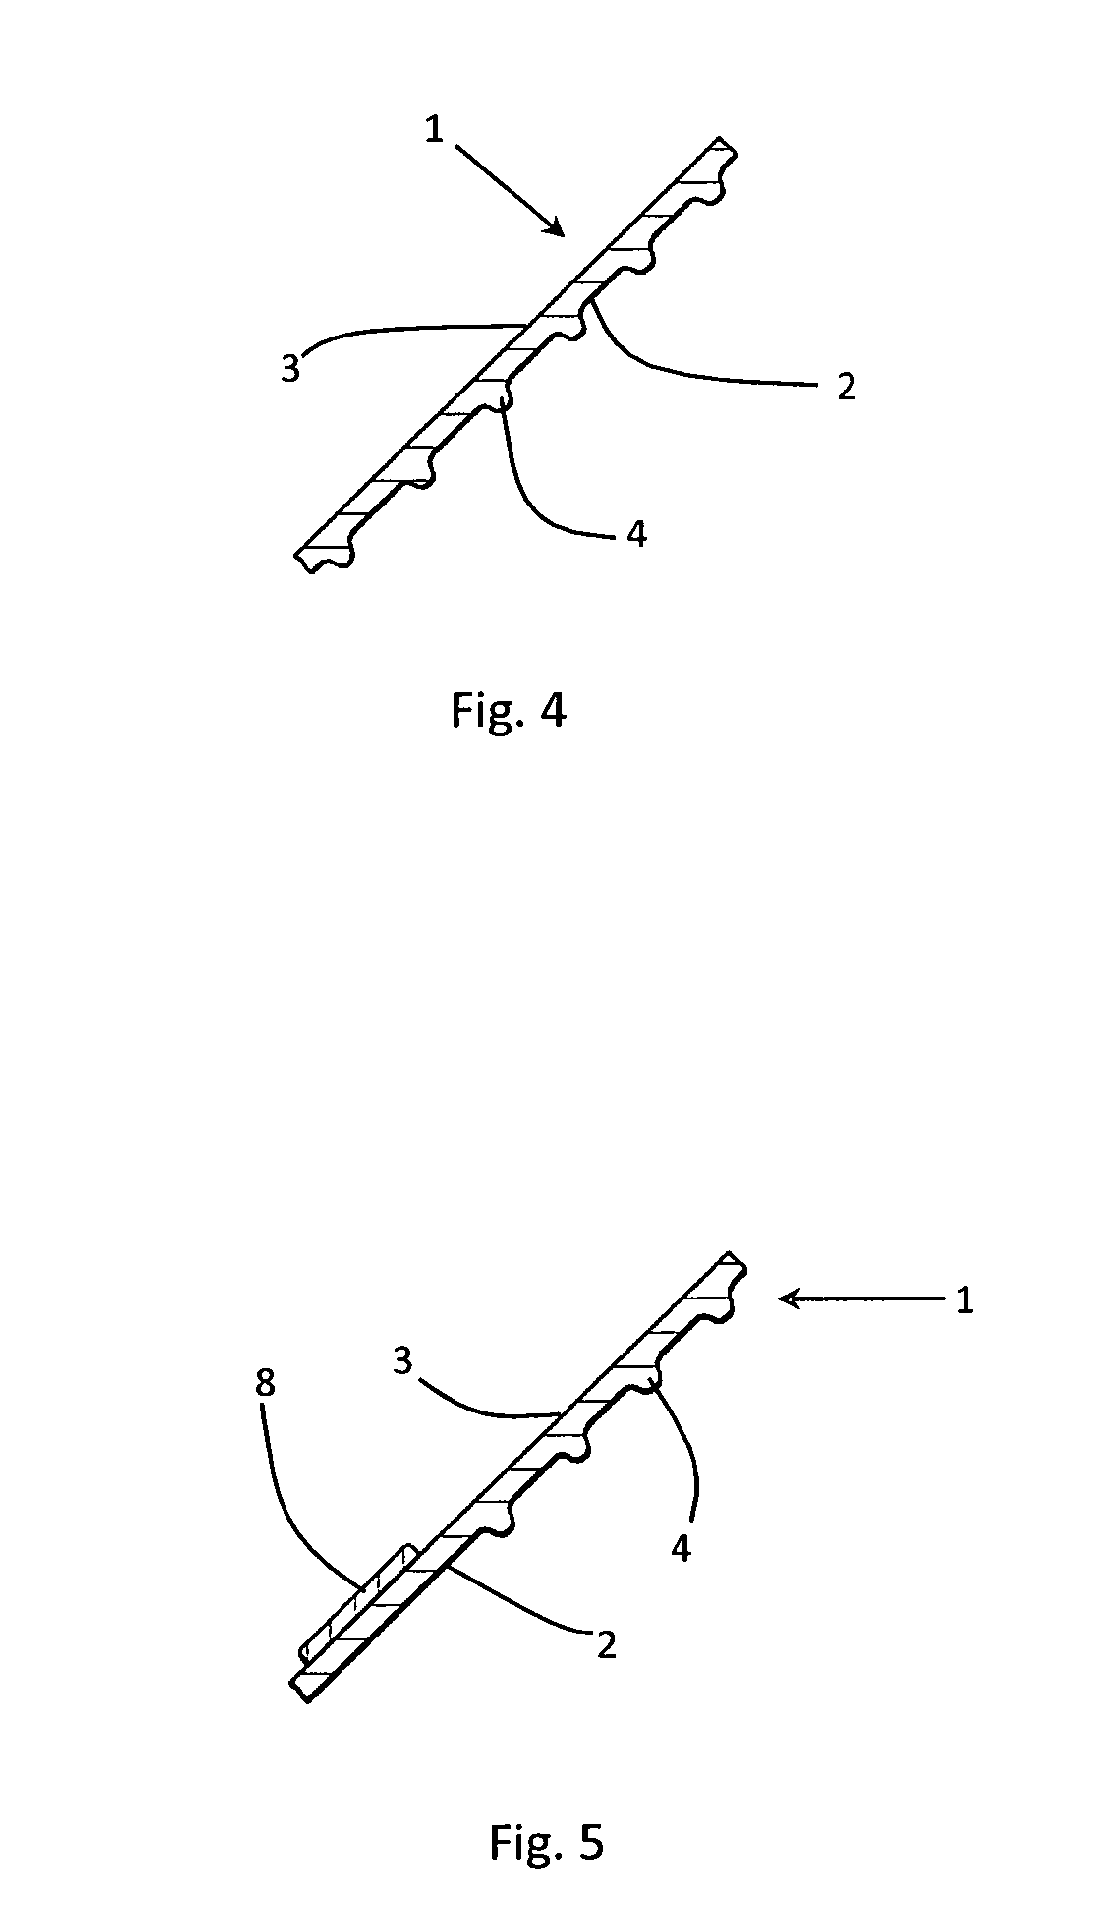 Separation disc for a centrifugal separator and a method for manufacturing the separation disc